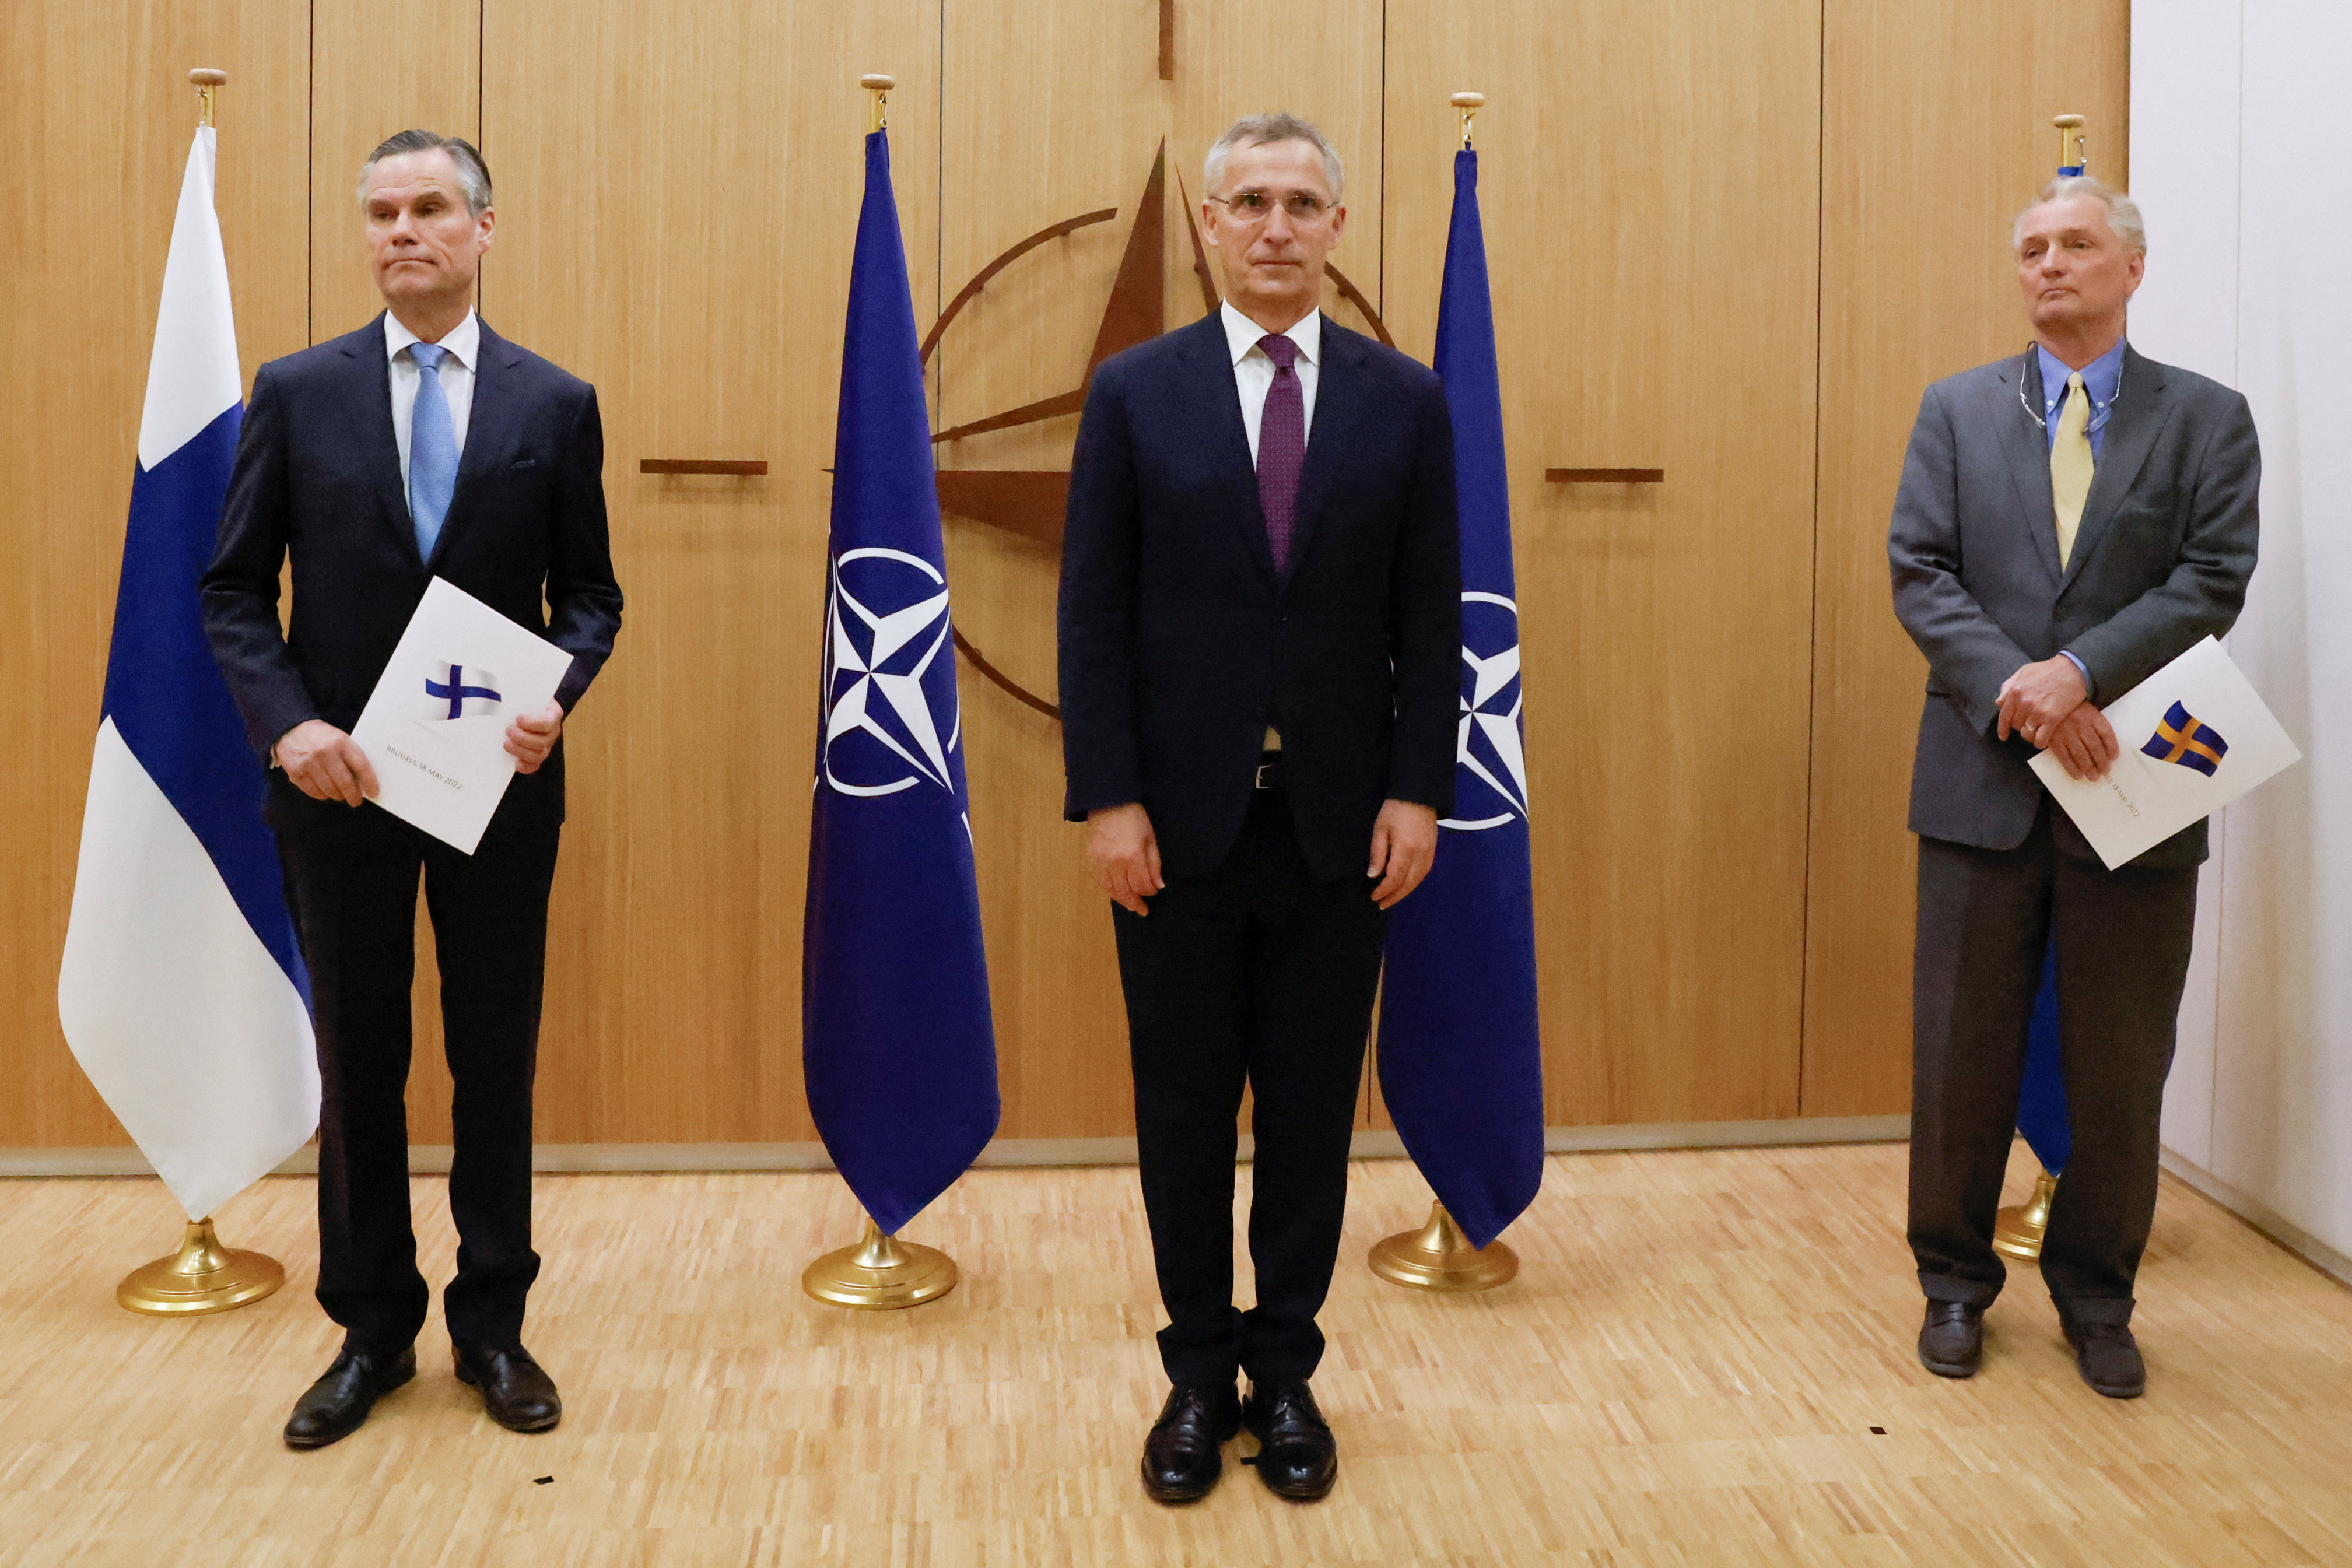 NATO holds ceremony to mark Sweden's and Finland's application for membership in Brussels's and Finland's application for membership in Brussels